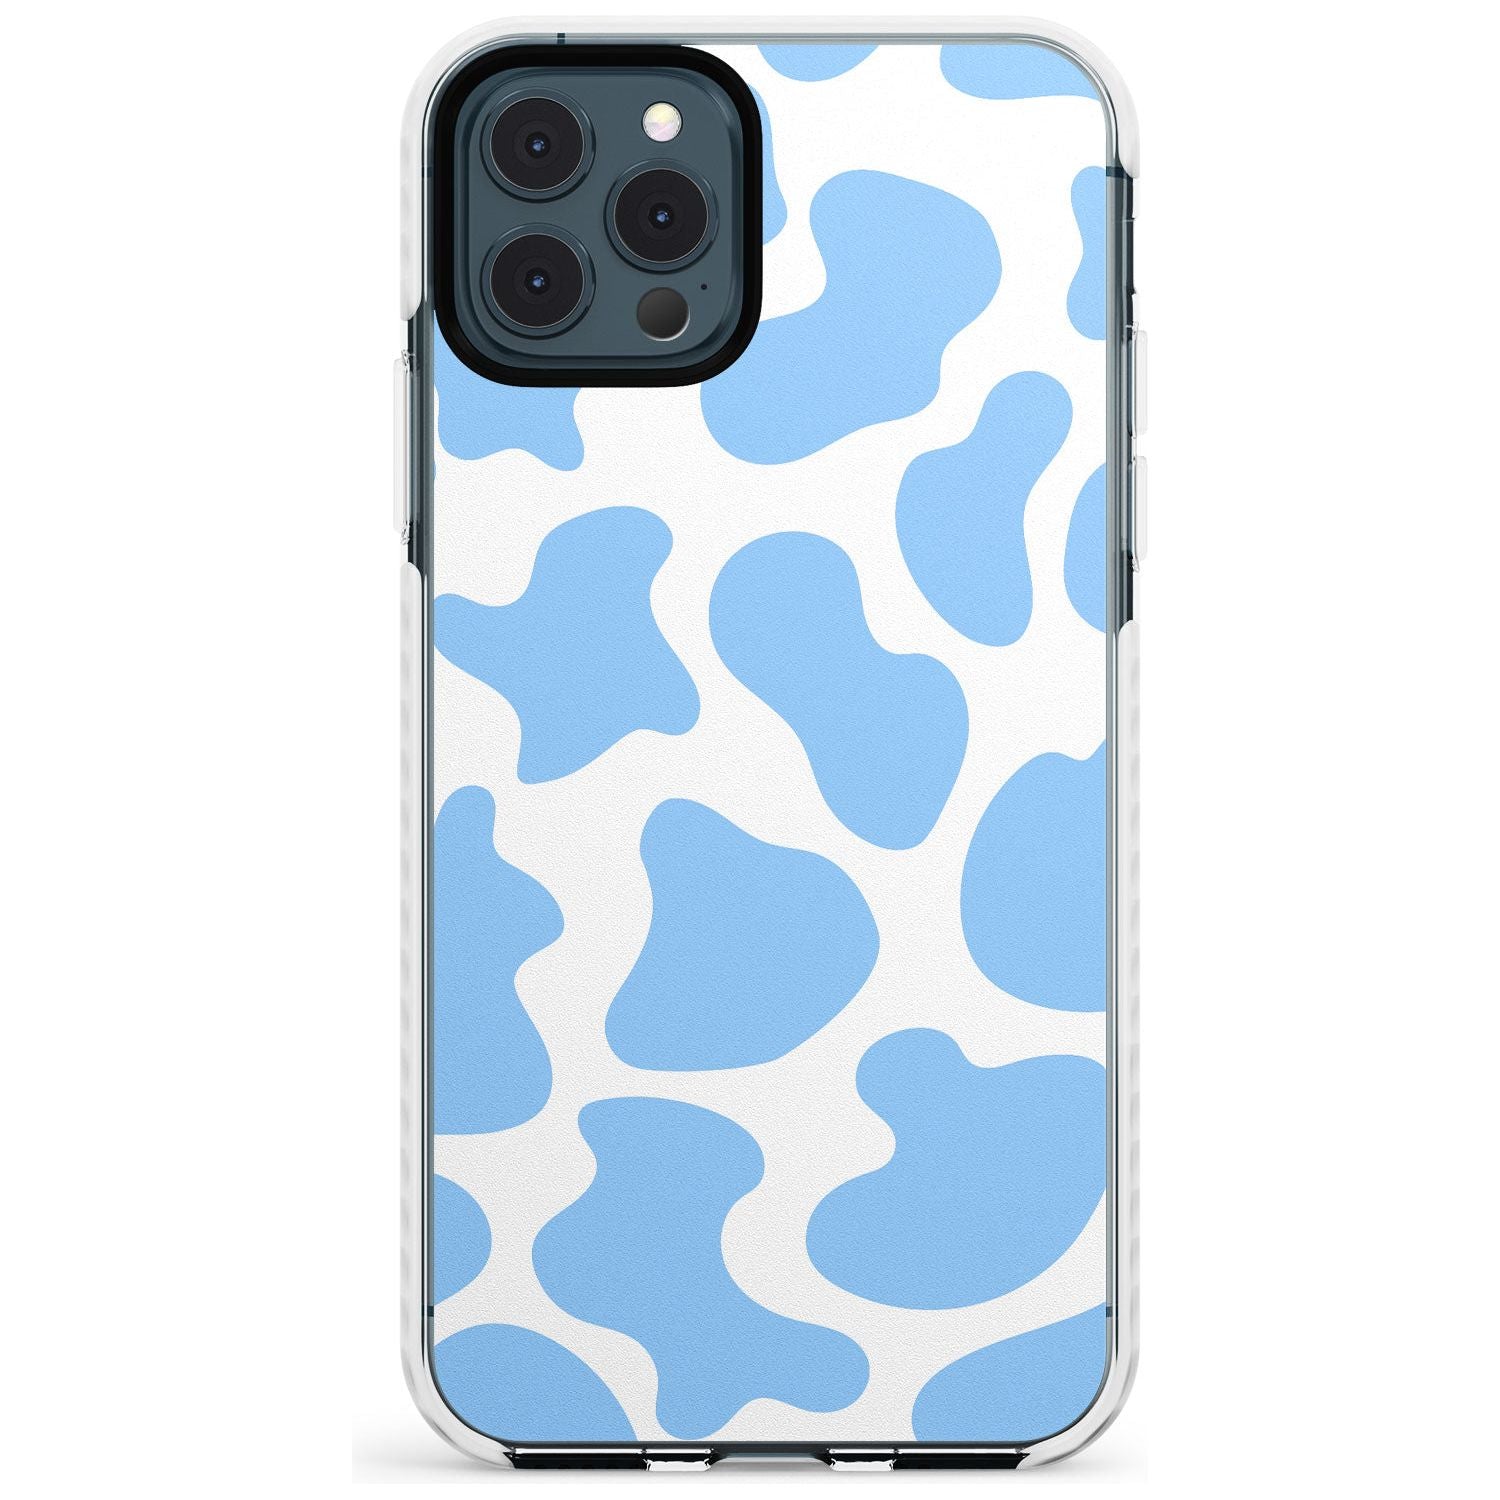 Blue and White Cow Print Impact Phone Case for iPhone 11 Pro Max